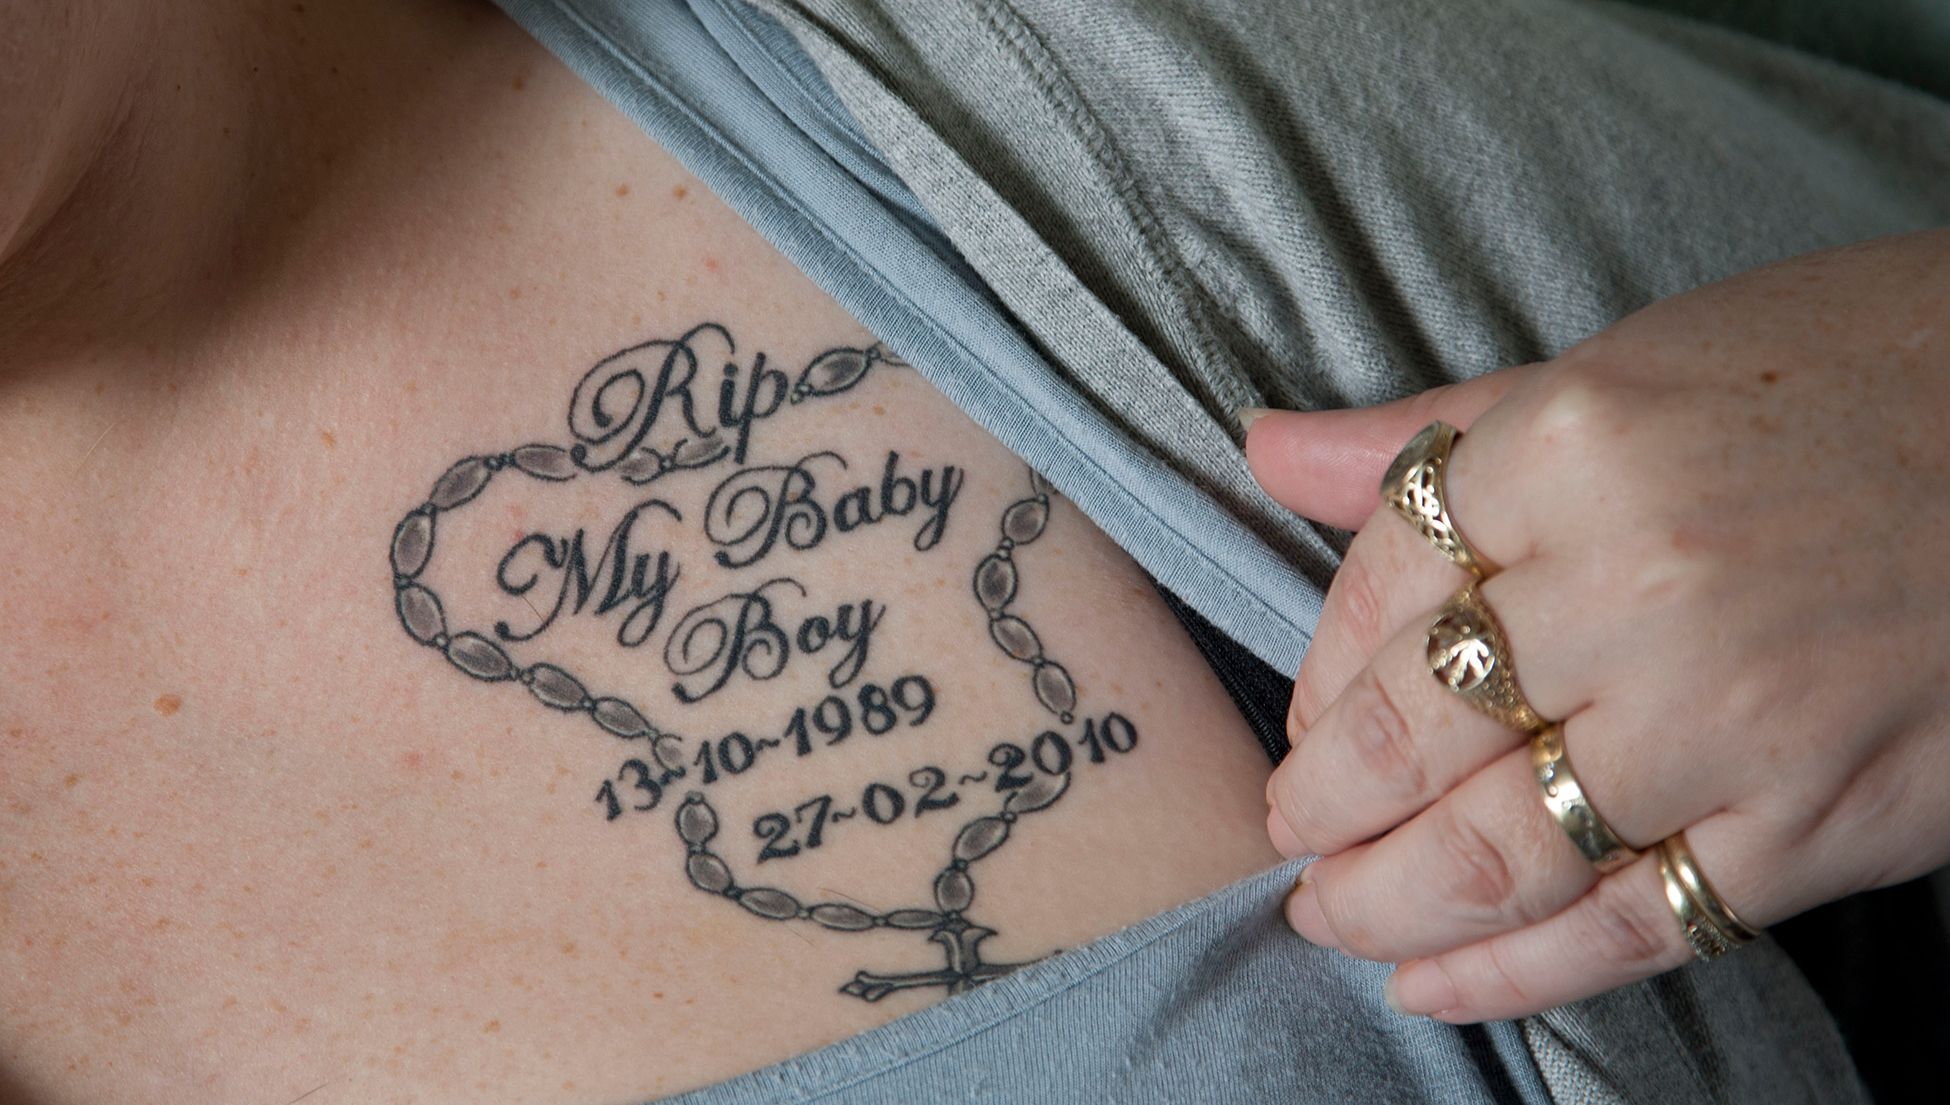 Tattoo Regret: Learn About Laser Tattoo Removal & Tattoo Cover-Up Options